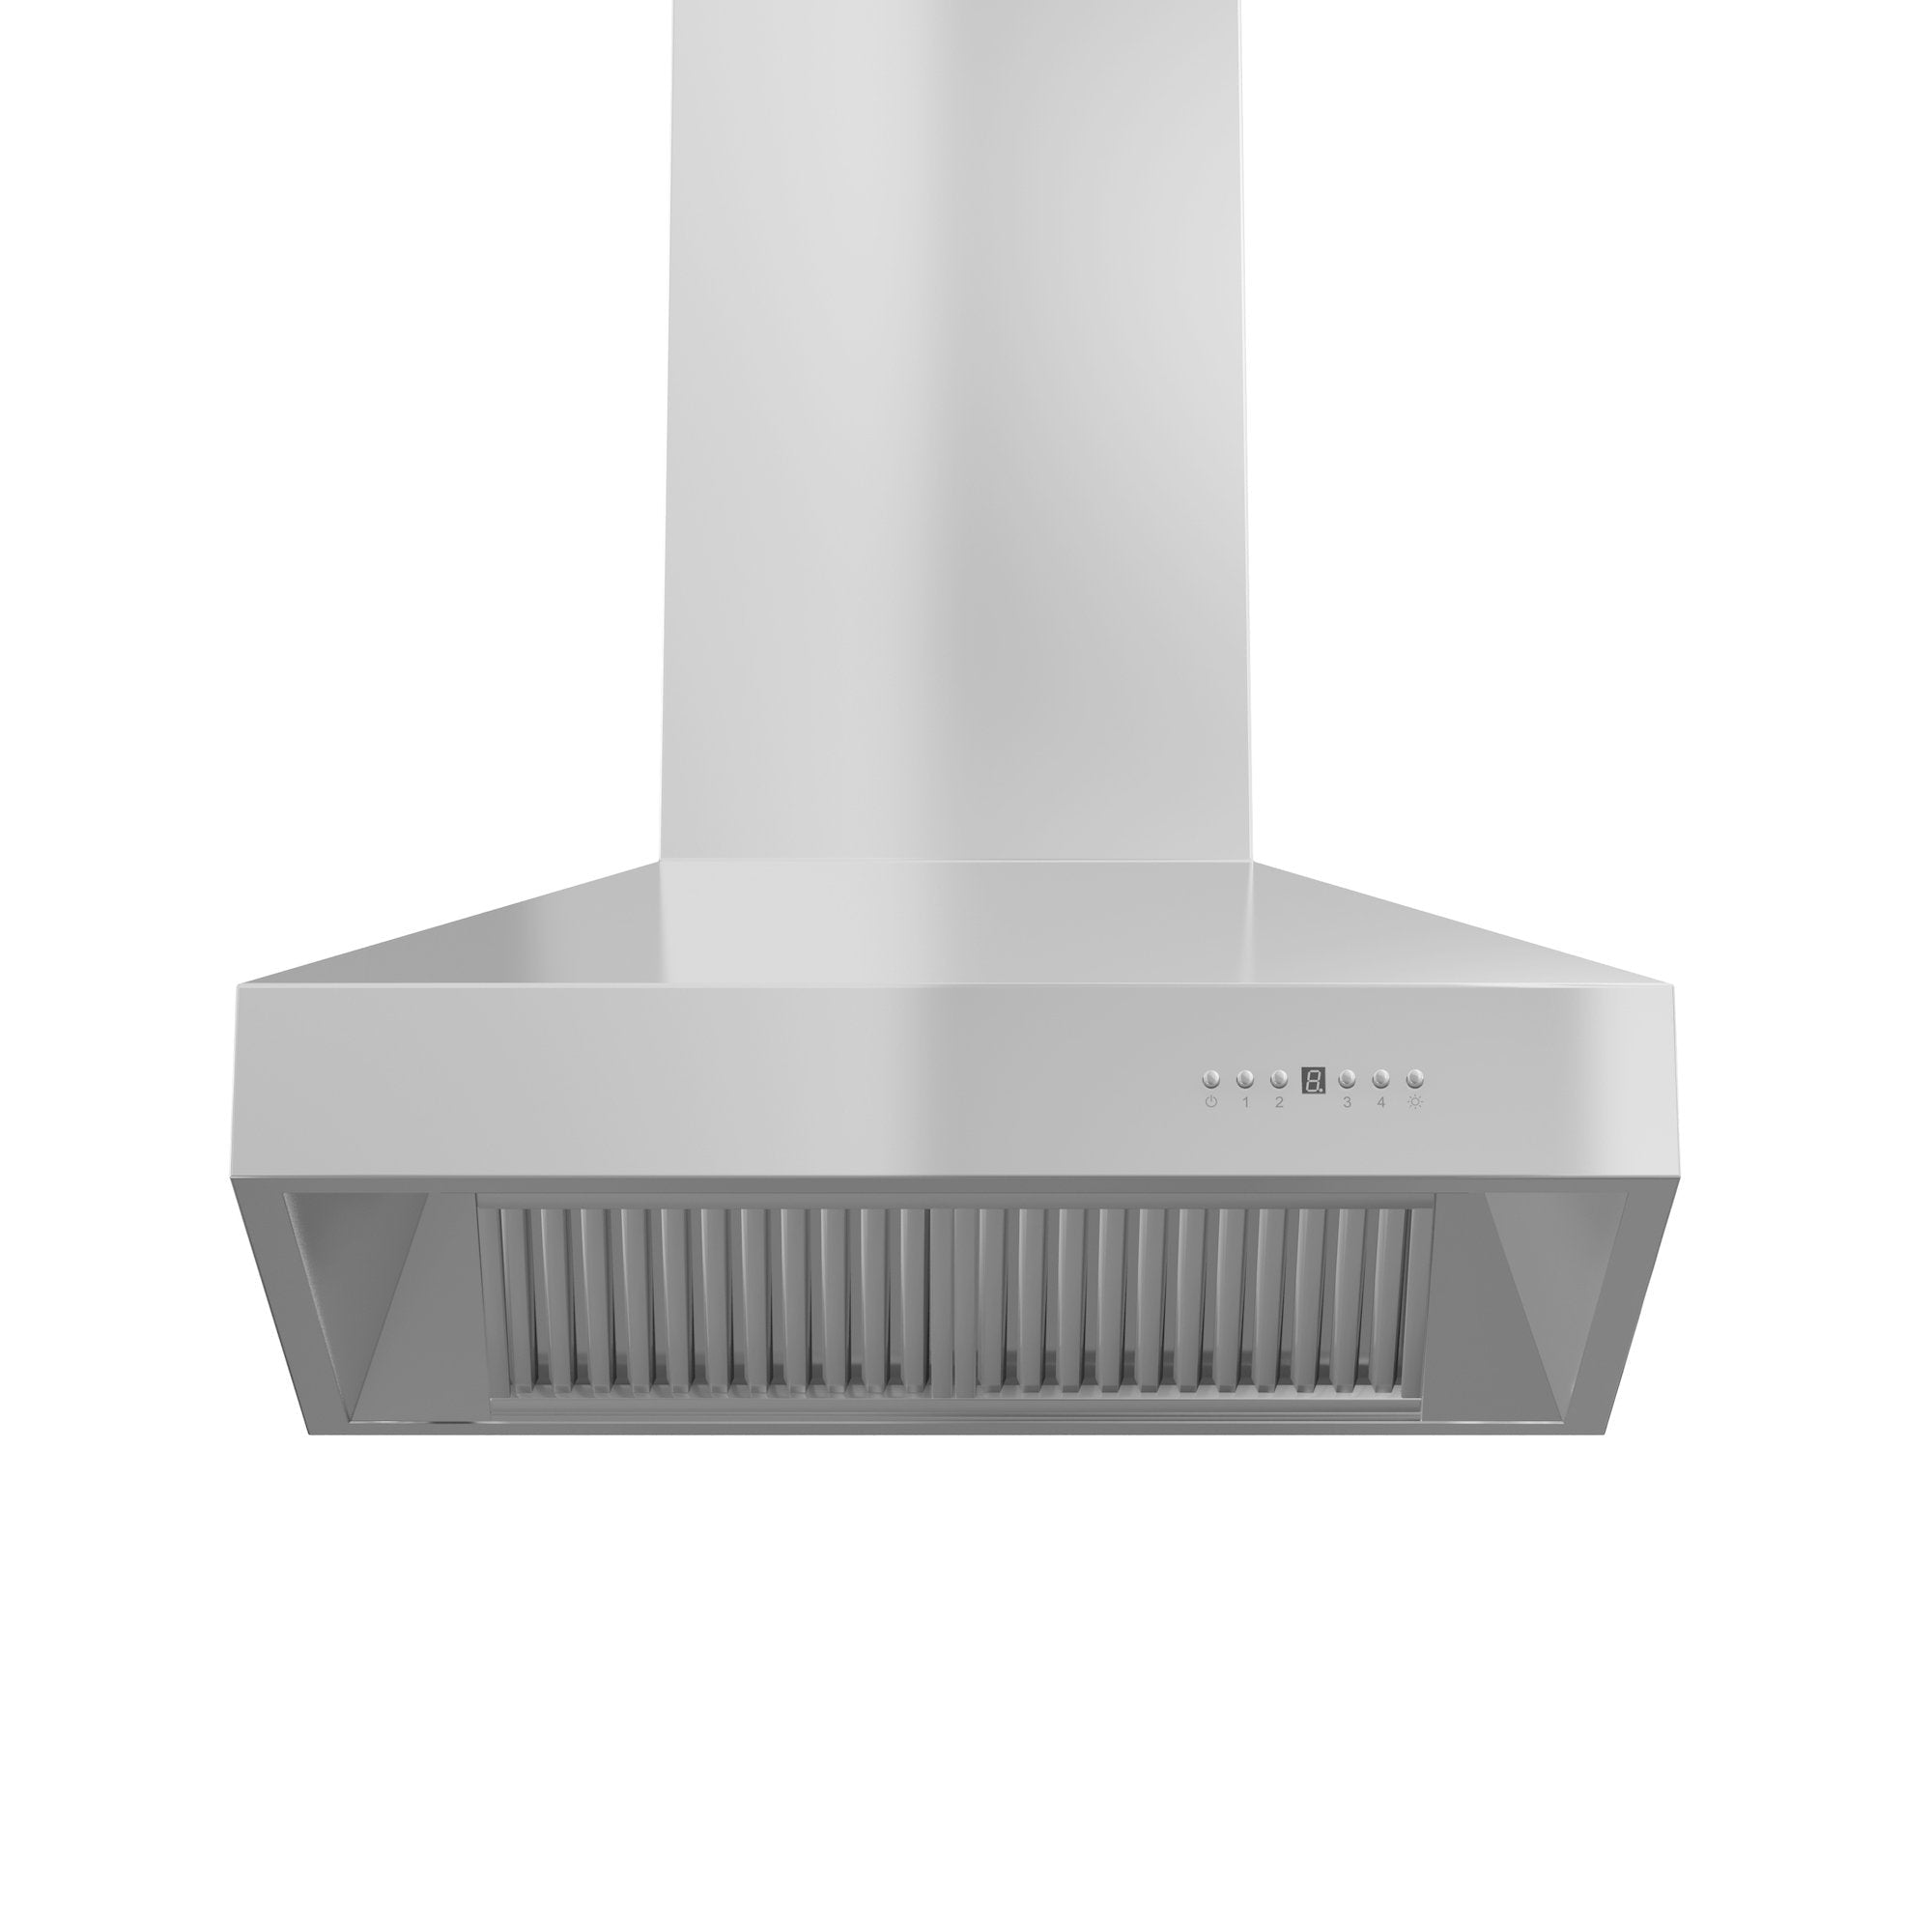 China Customized Wall Mount Range Hood Rear Vent Suppliers, Manufacturers,  Factory - TRUELI